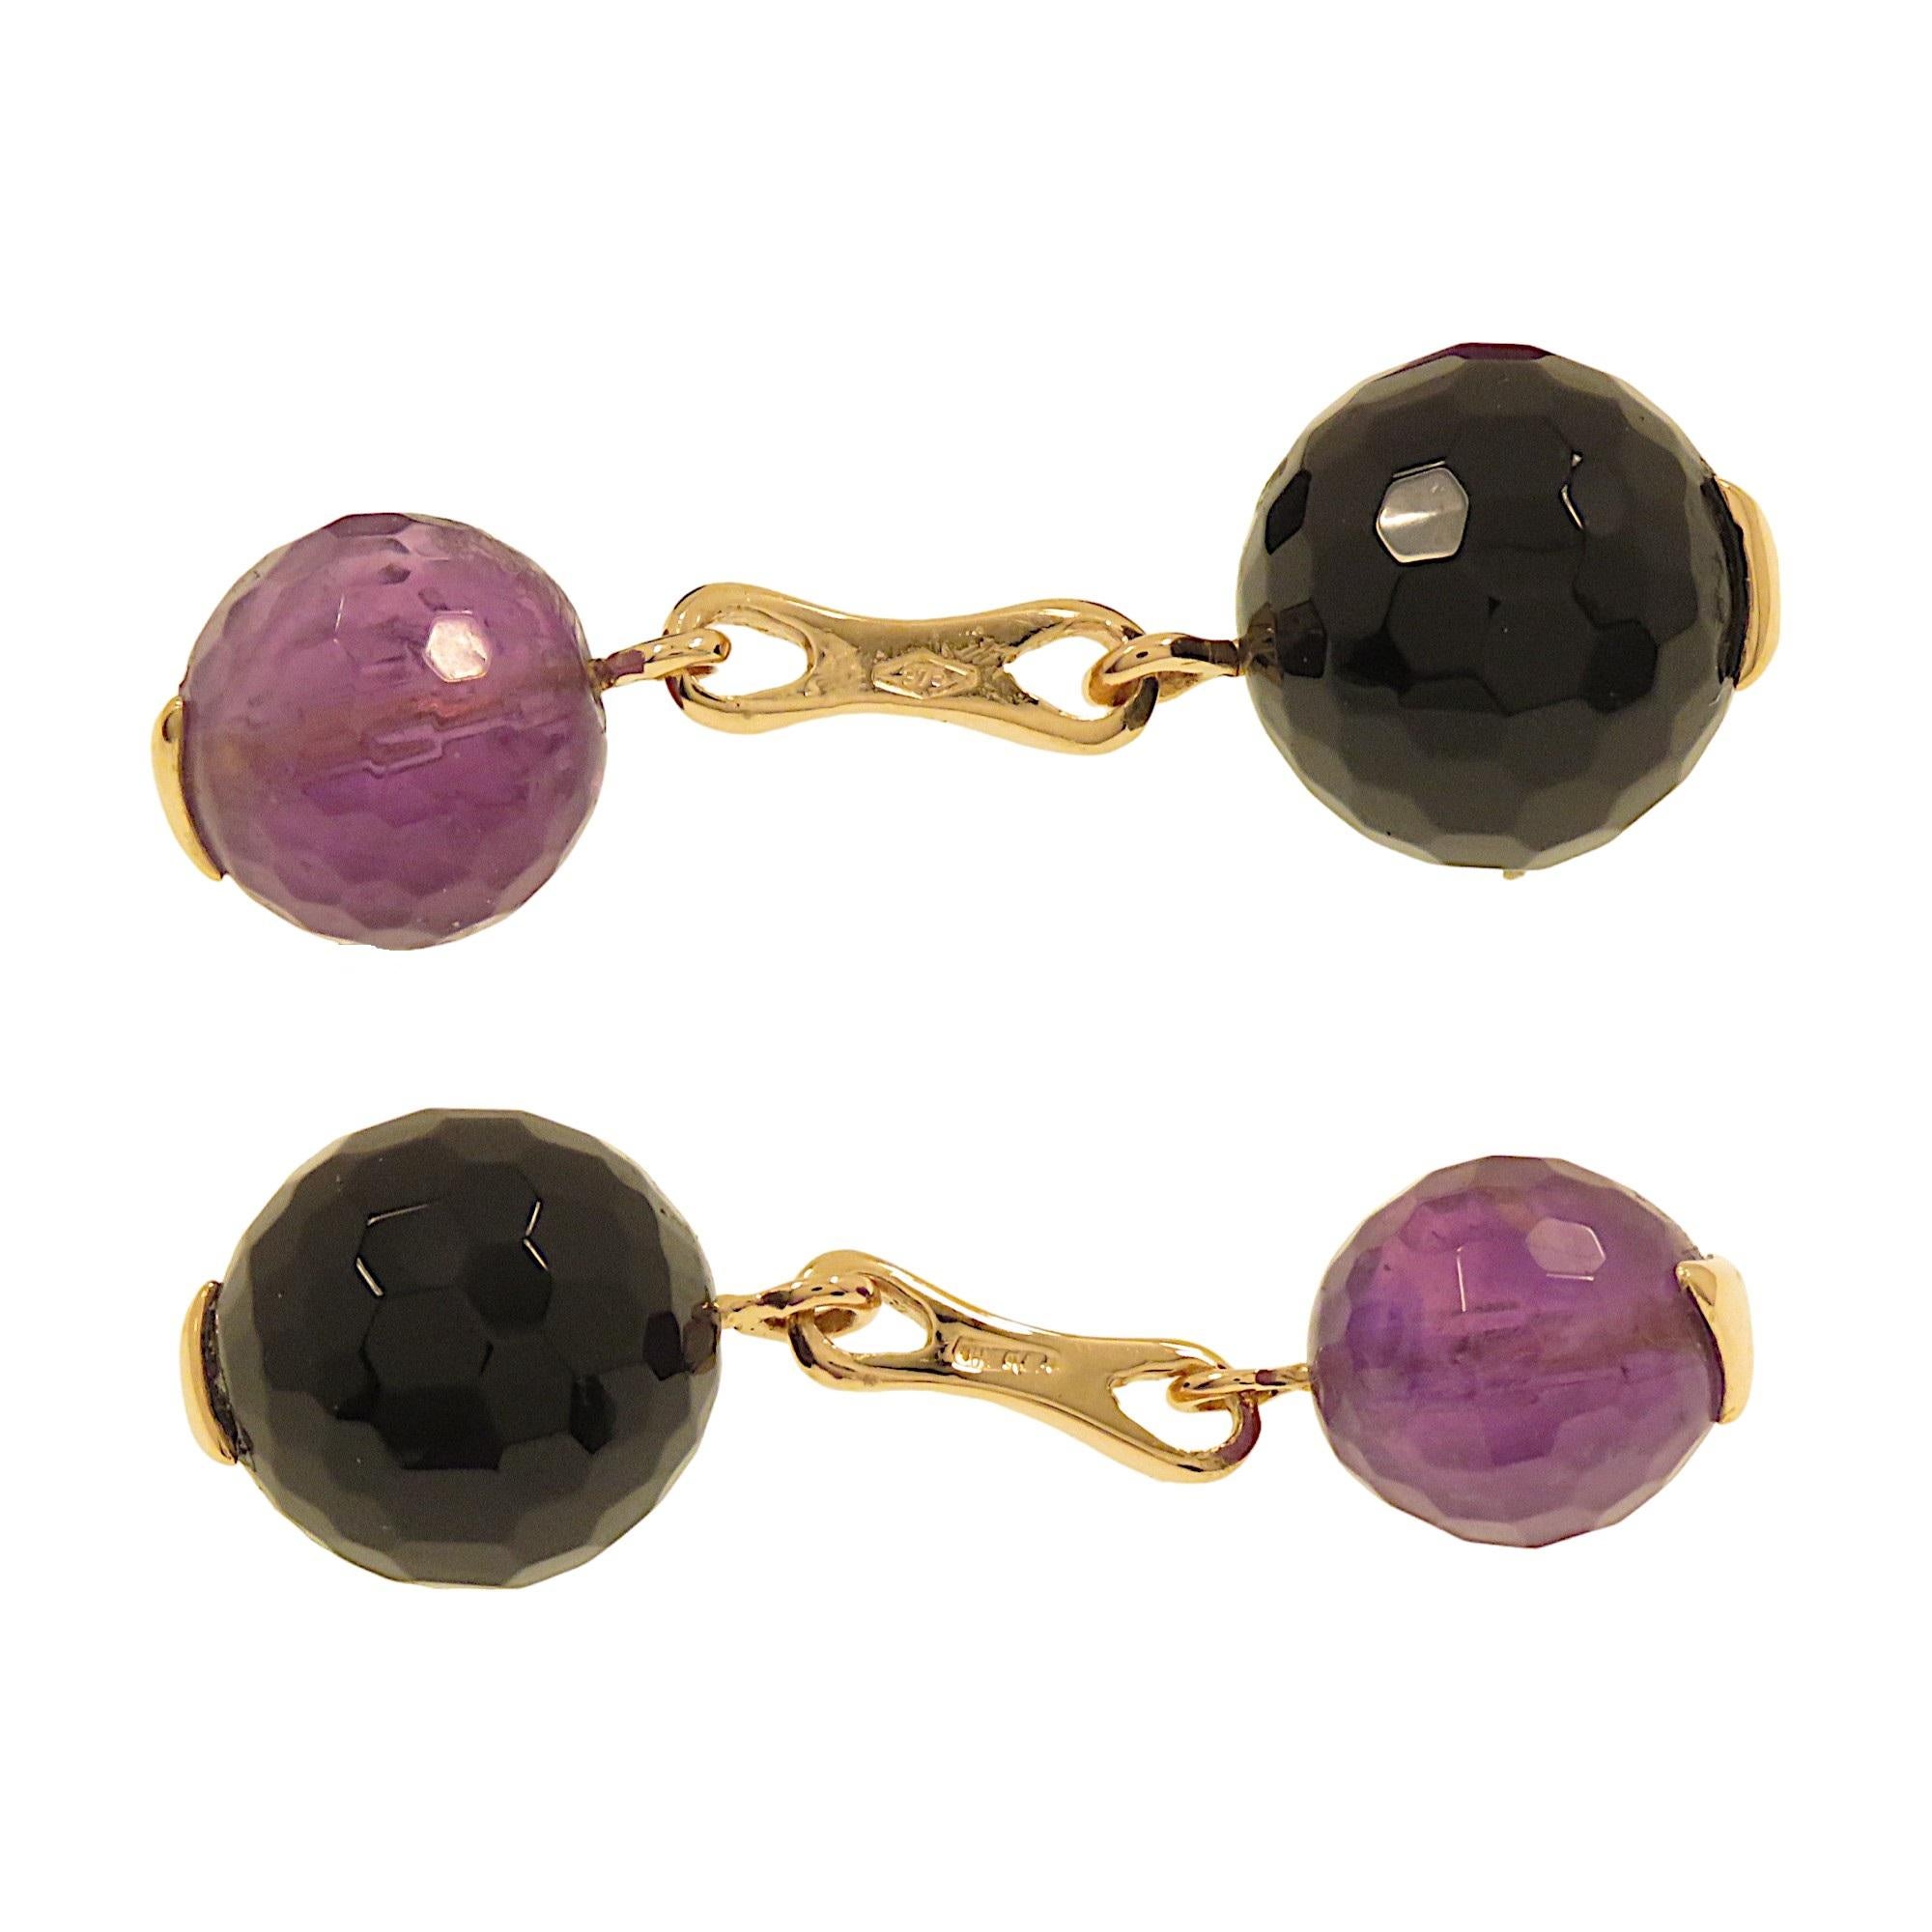 Bead Botta Jewelry cufflinks with onyx and amethyst in rose gold For Sale